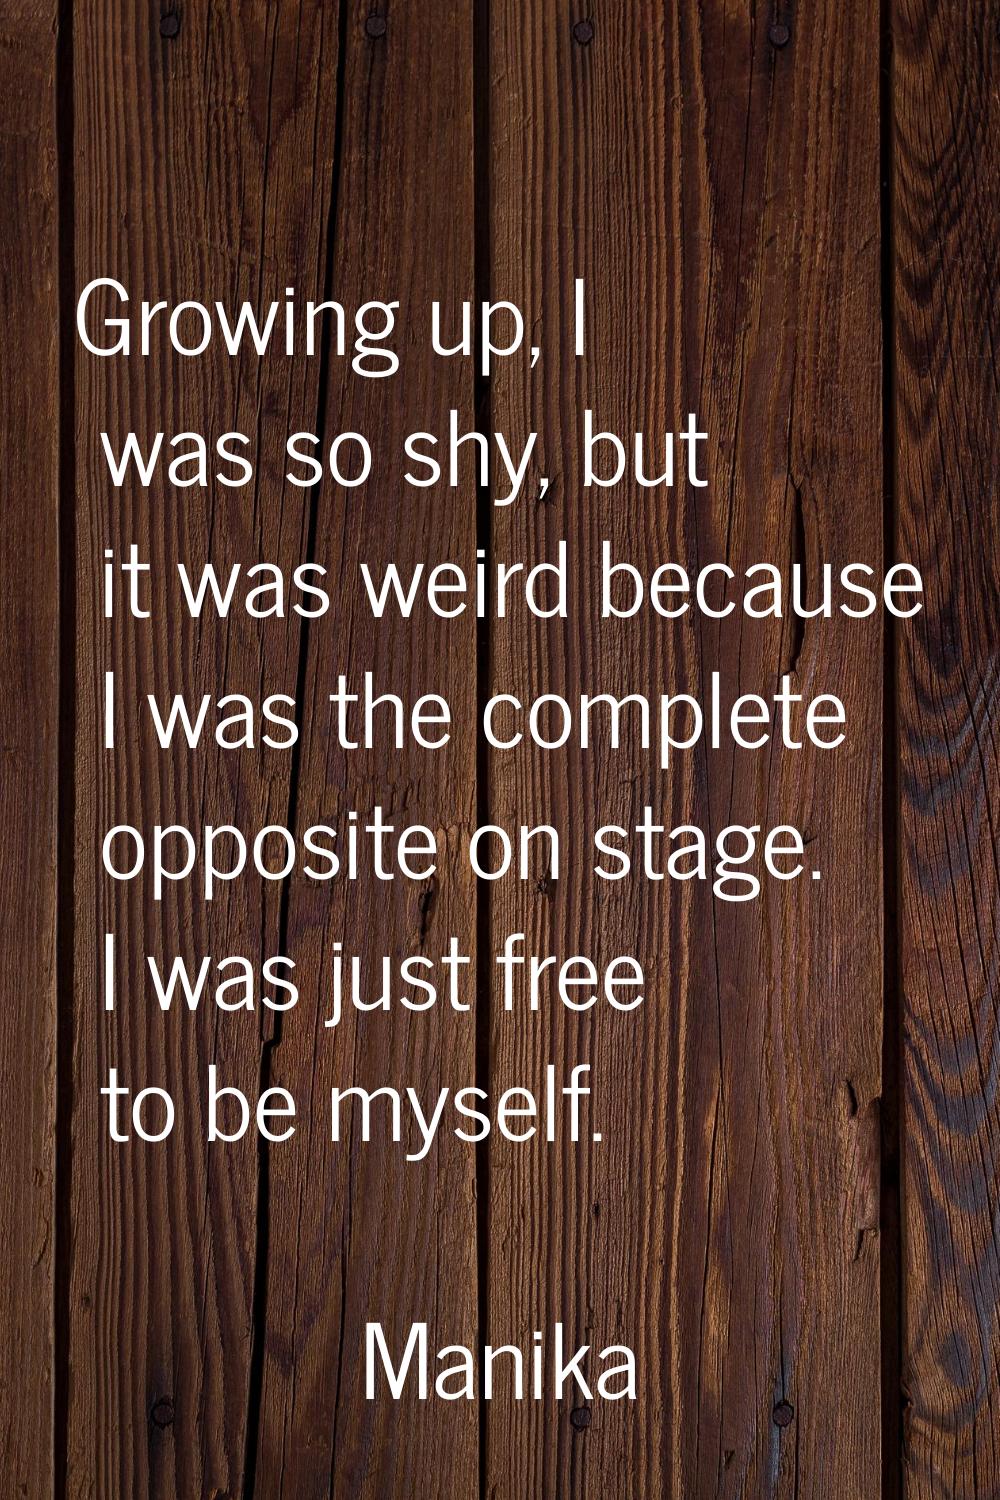 Growing up, I was so shy, but it was weird because I was the complete opposite on stage. I was just